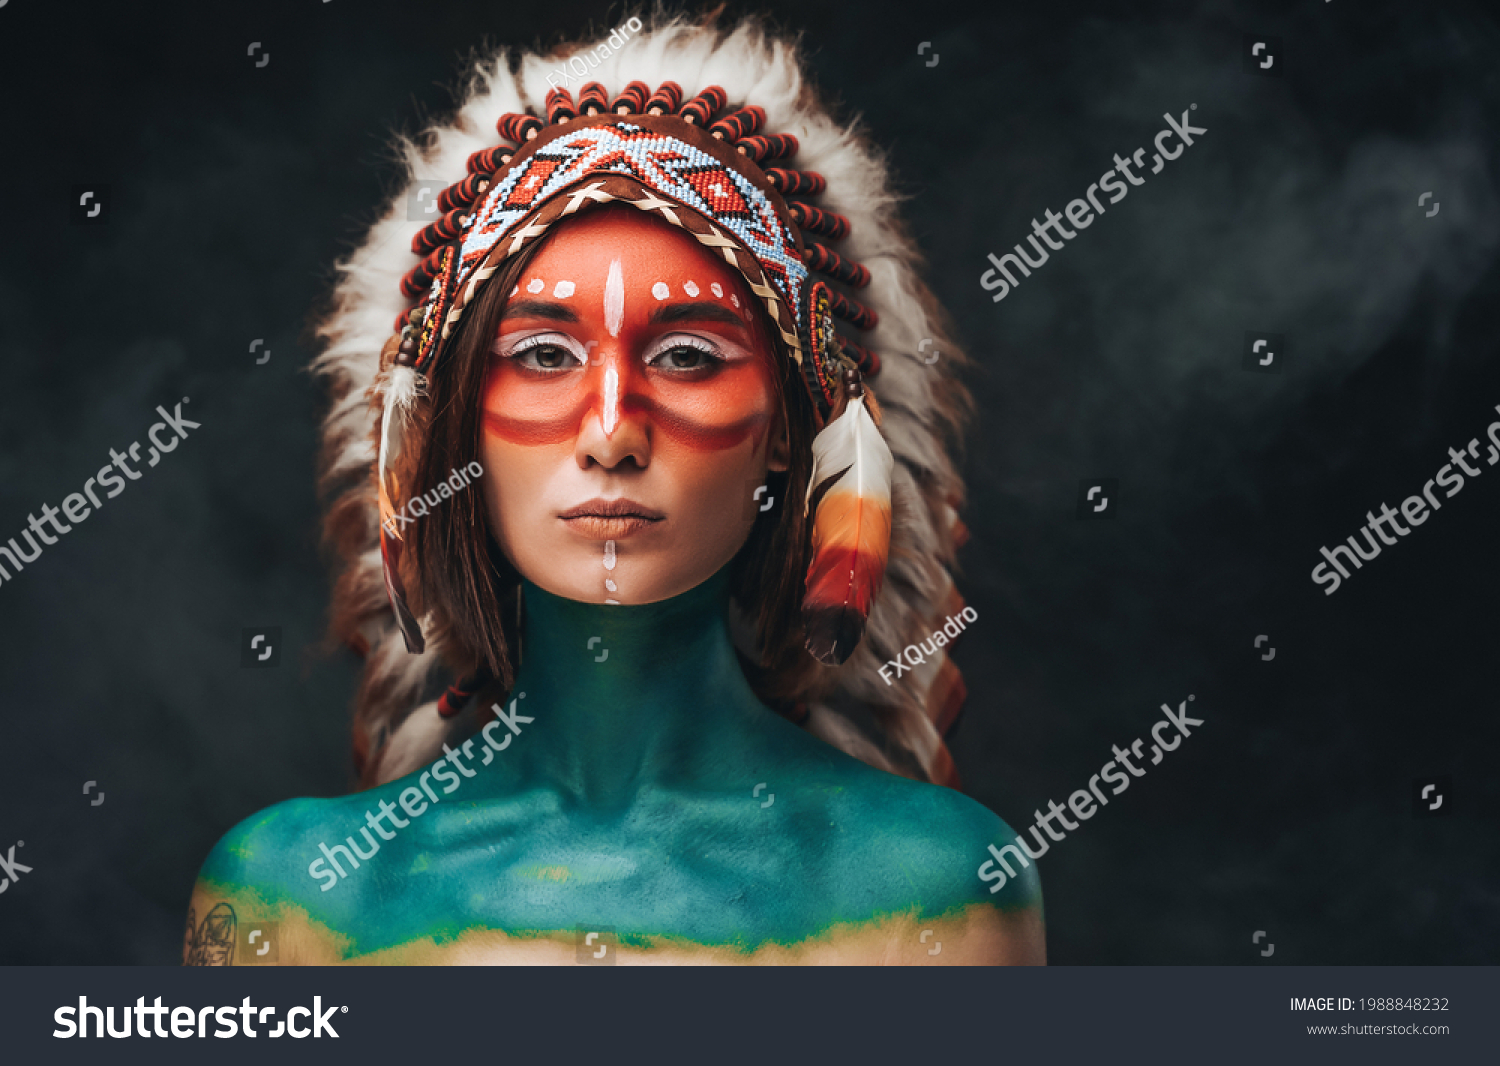 American indian woman with headdress and makeup #1988848232